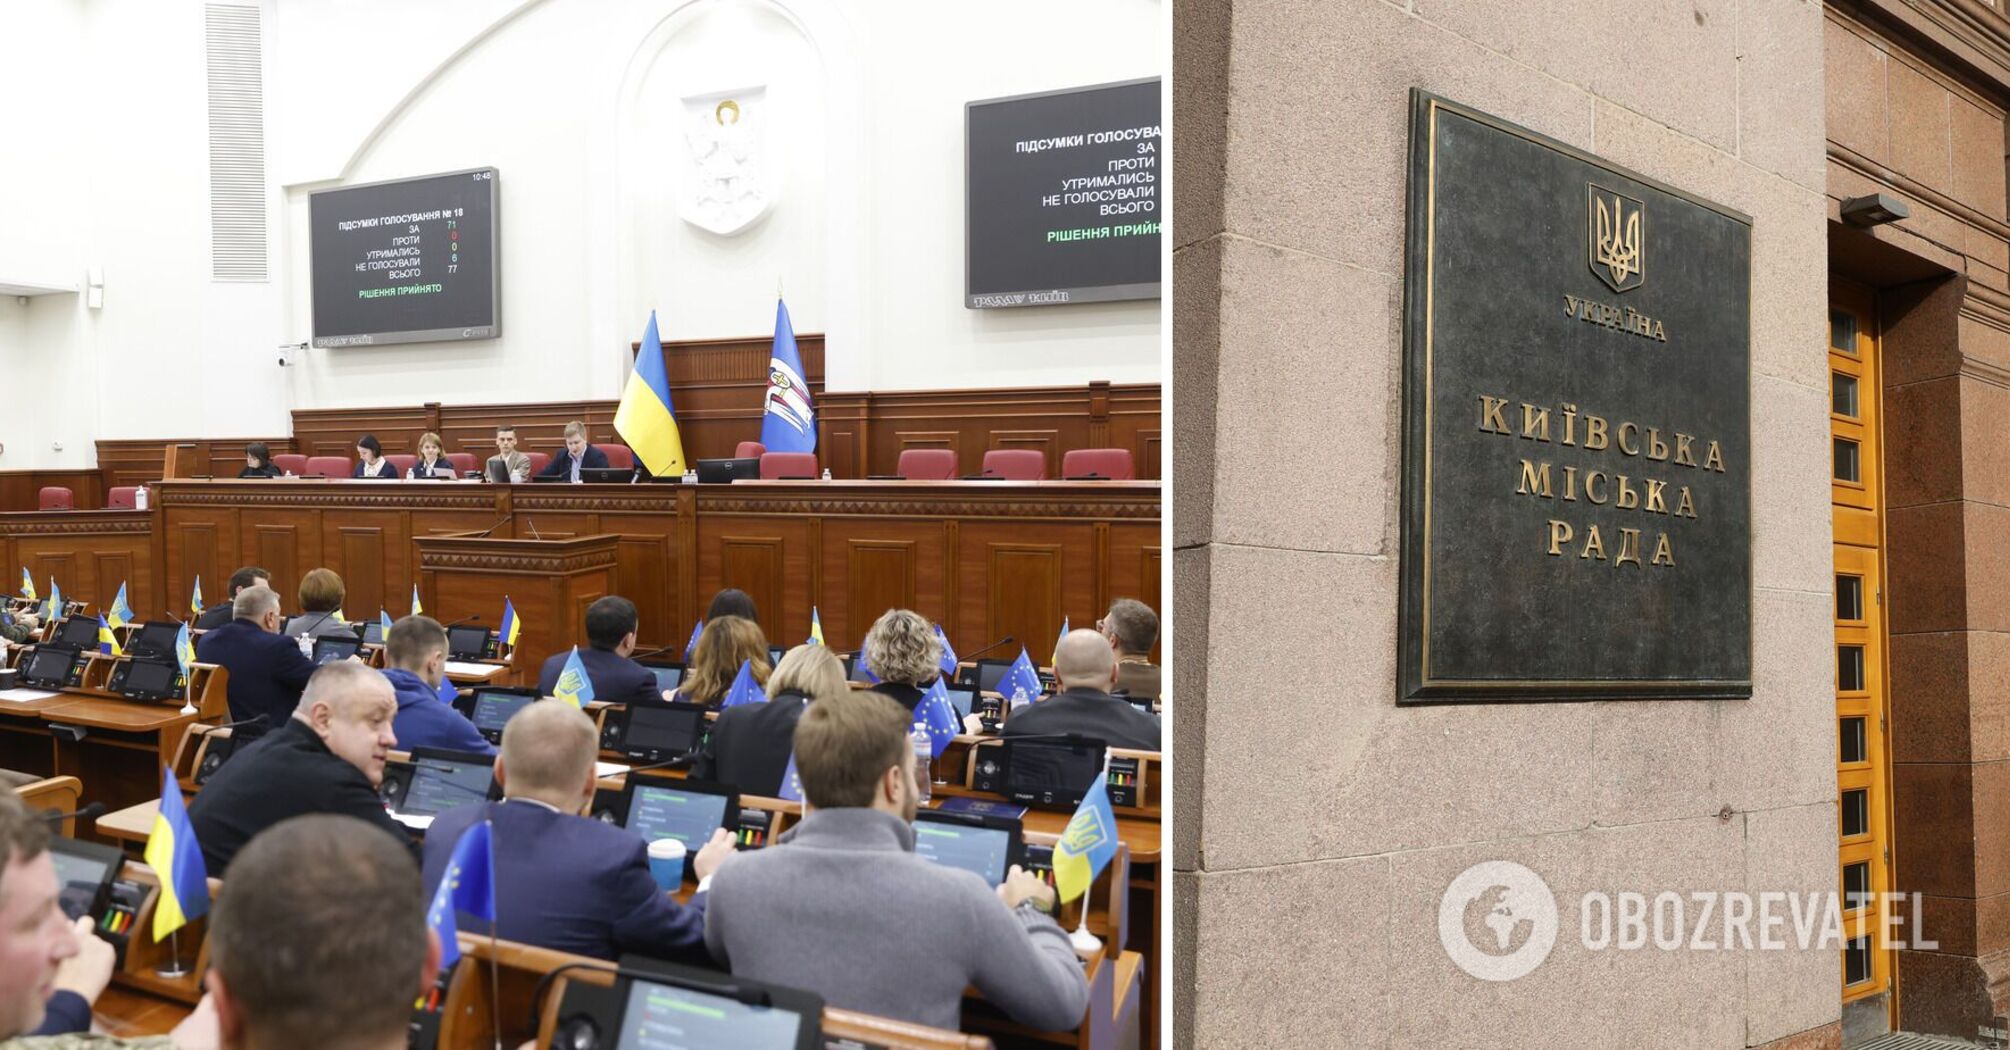 Kyiv City Council has renamed 26 educational and cultural institutions